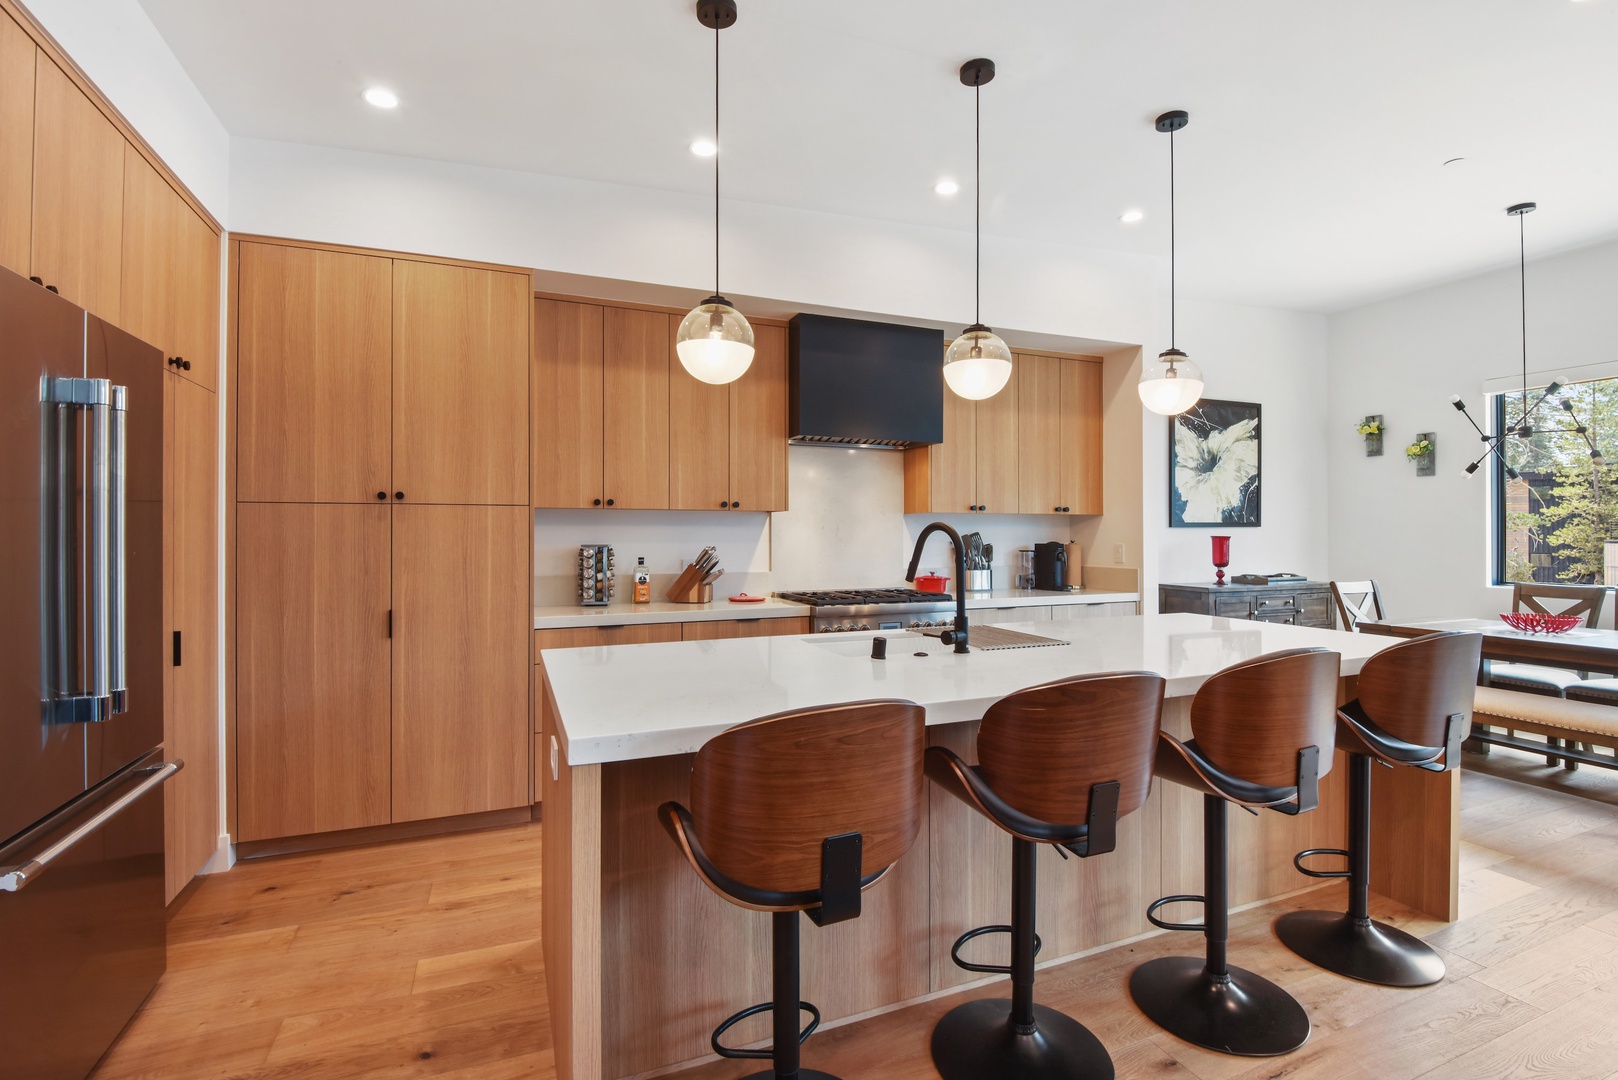 Modern kitchen with Nespresso, toaster, rice cooker, kettle, blender, wine fridge, and more